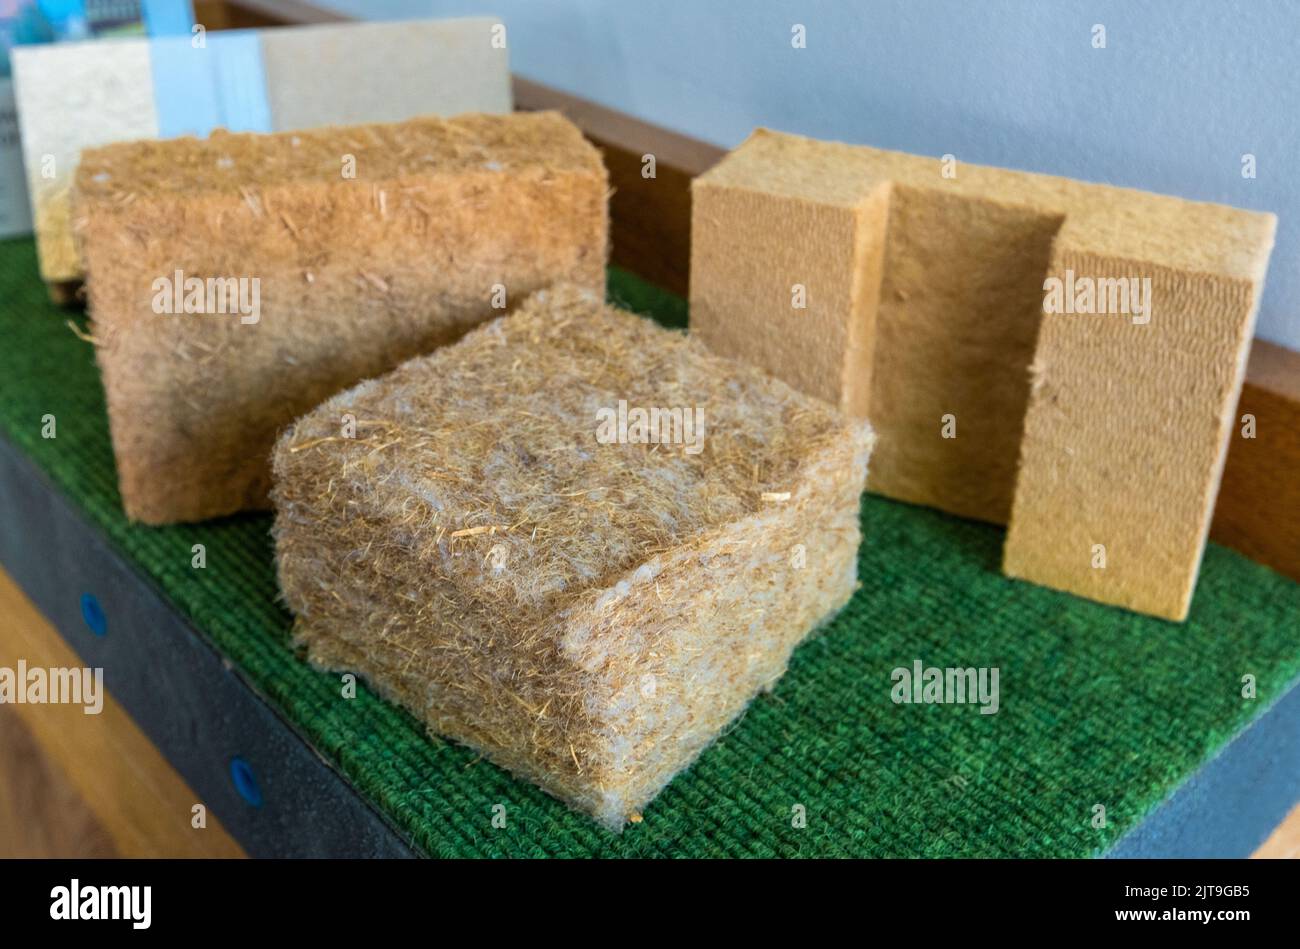 18 August 2022, Mecklenburg-Western Pomerania, Gülzow-Prüzen: Insulation materials made from renewable raw materials can be seen at the Agency for Renewable Resources. Photo: Jens Büttner/dpa Stock Photo